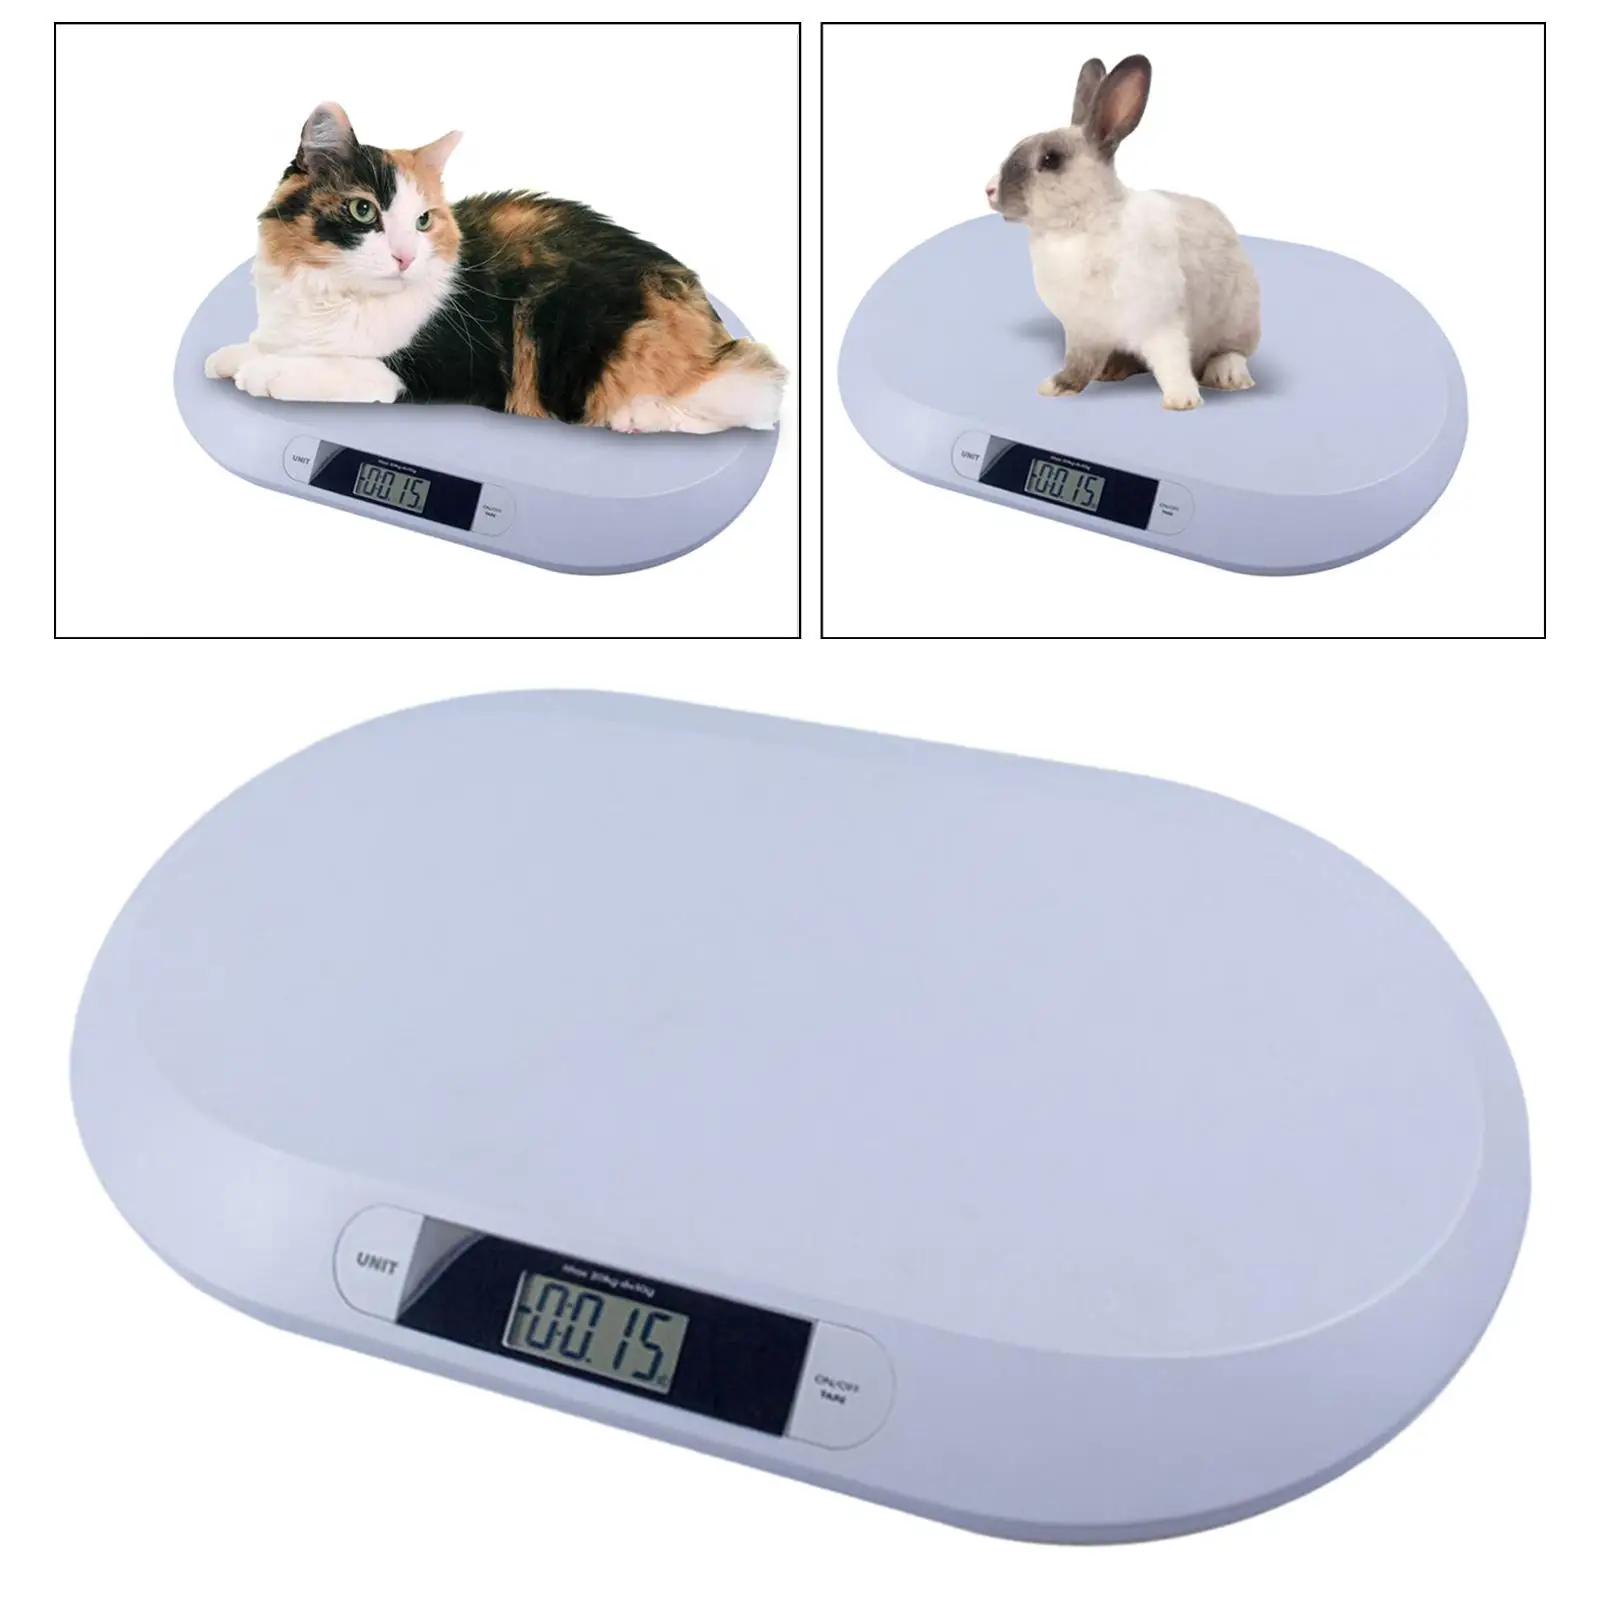 Smart Pet Scale 44.1lb Capacity Accurate Comfort LCD Display Multifunction Weigh Meter for Puppy Newborns Toddlers Infants Cats